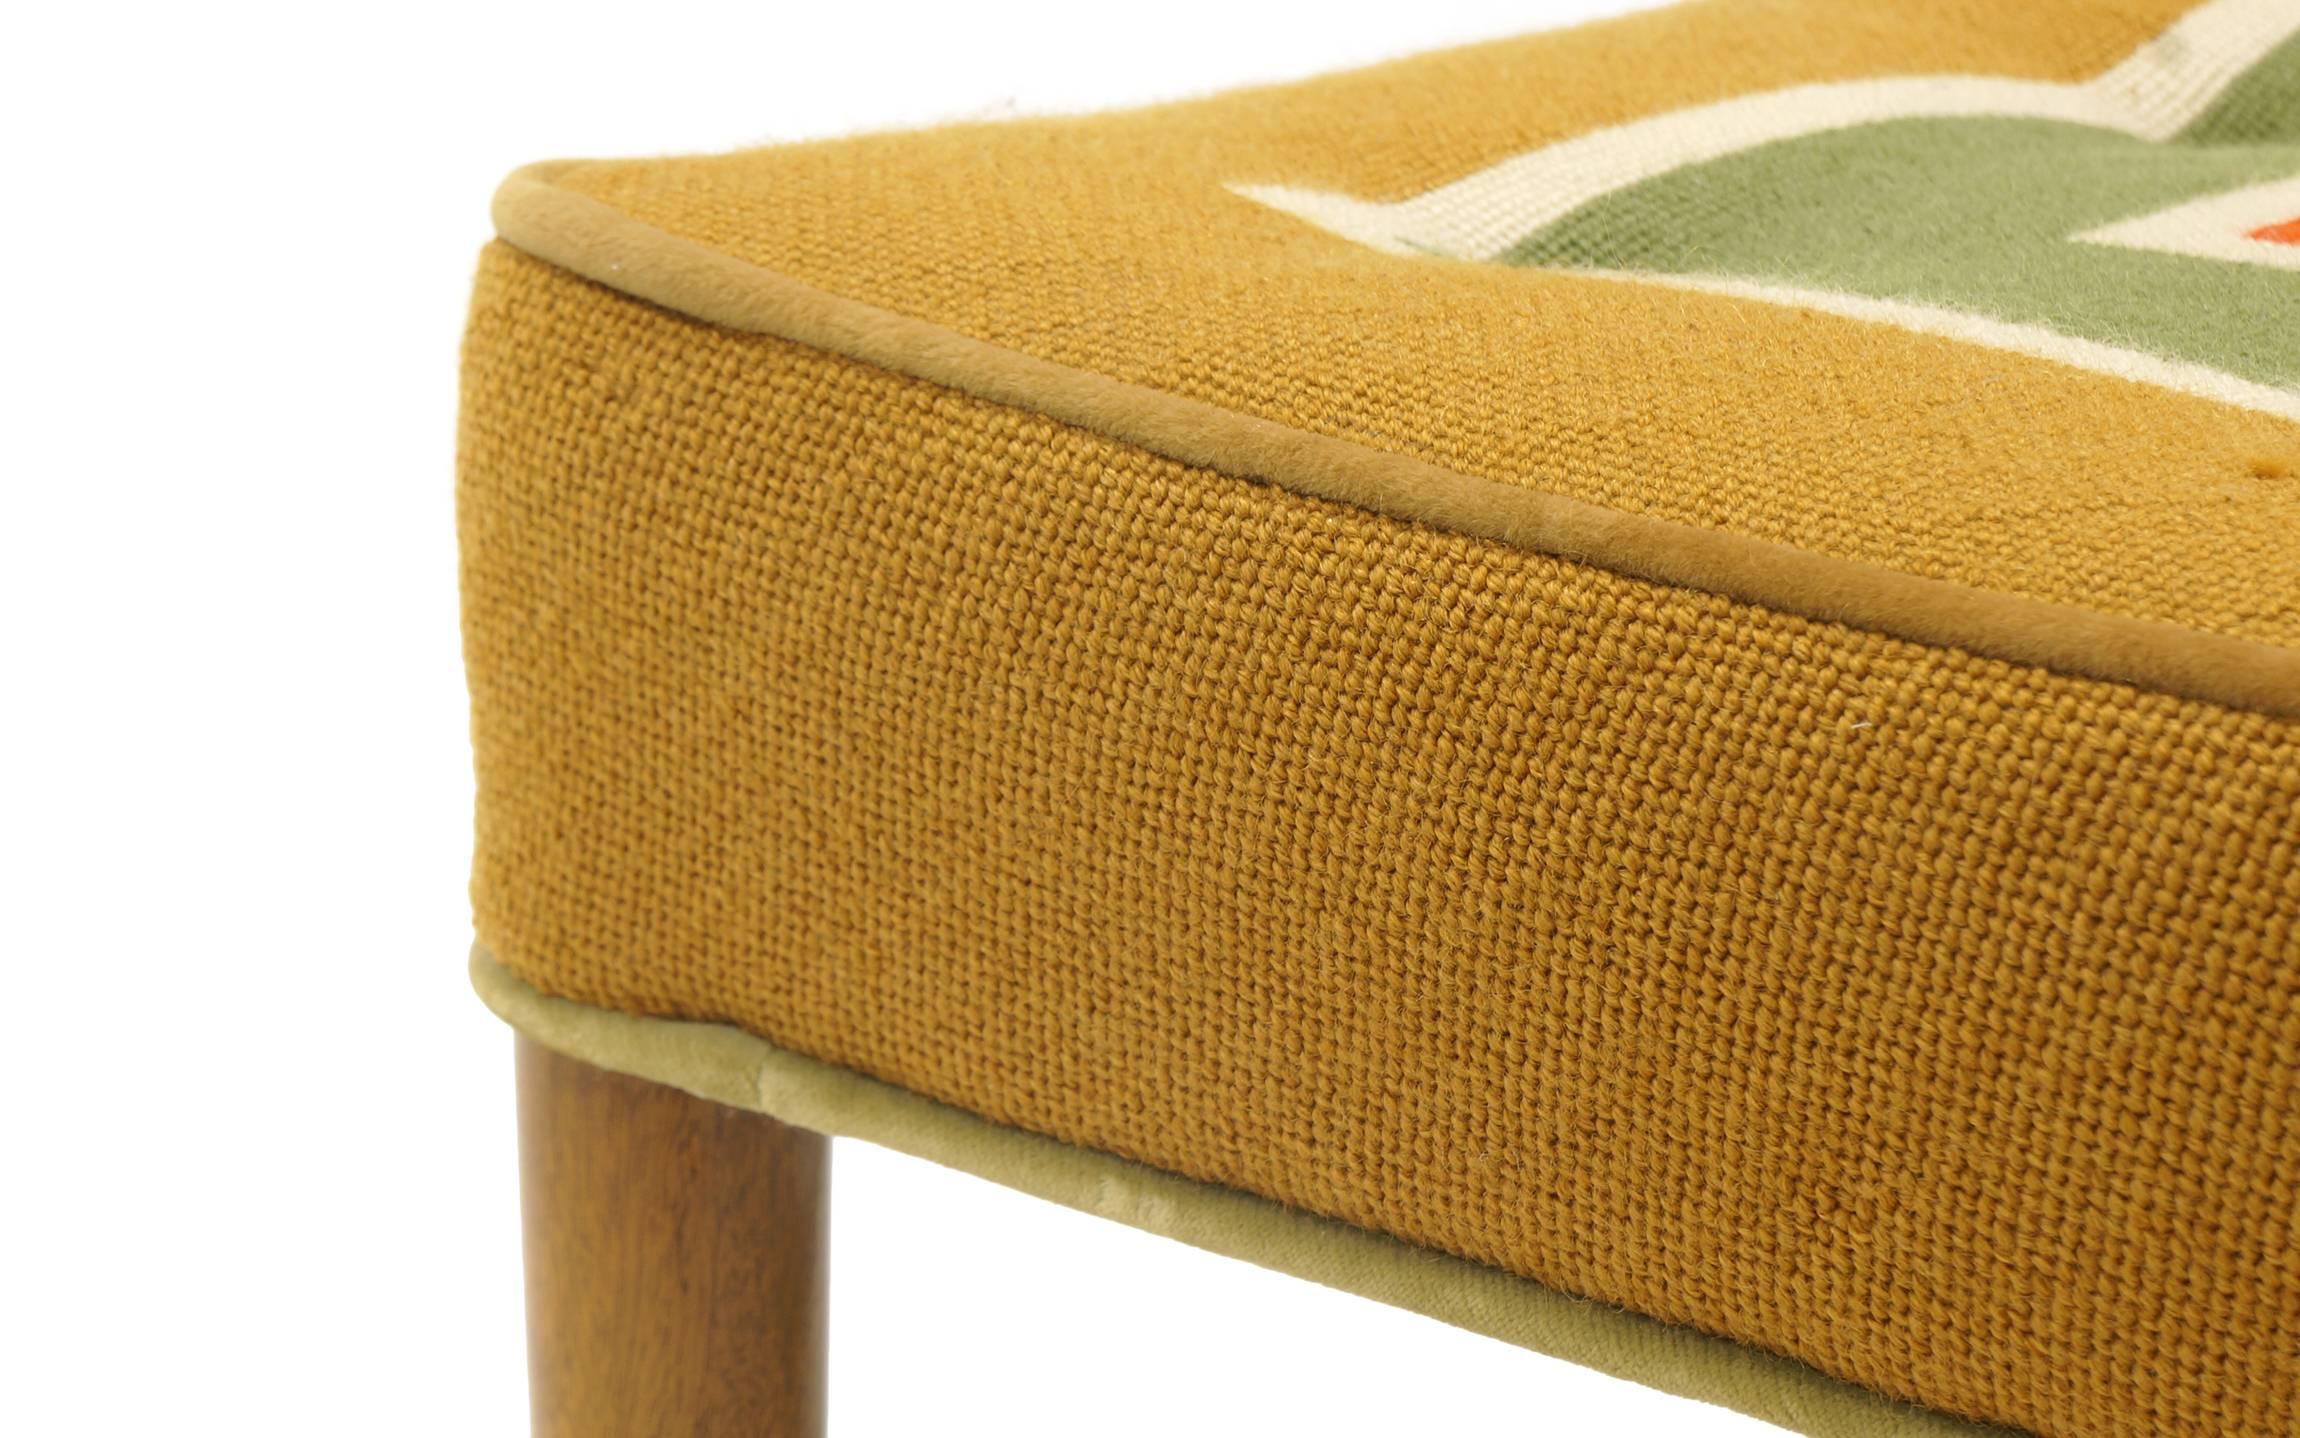 Upholstery Foot Stool or Ottoman by Edward Wormley for Dunbar.